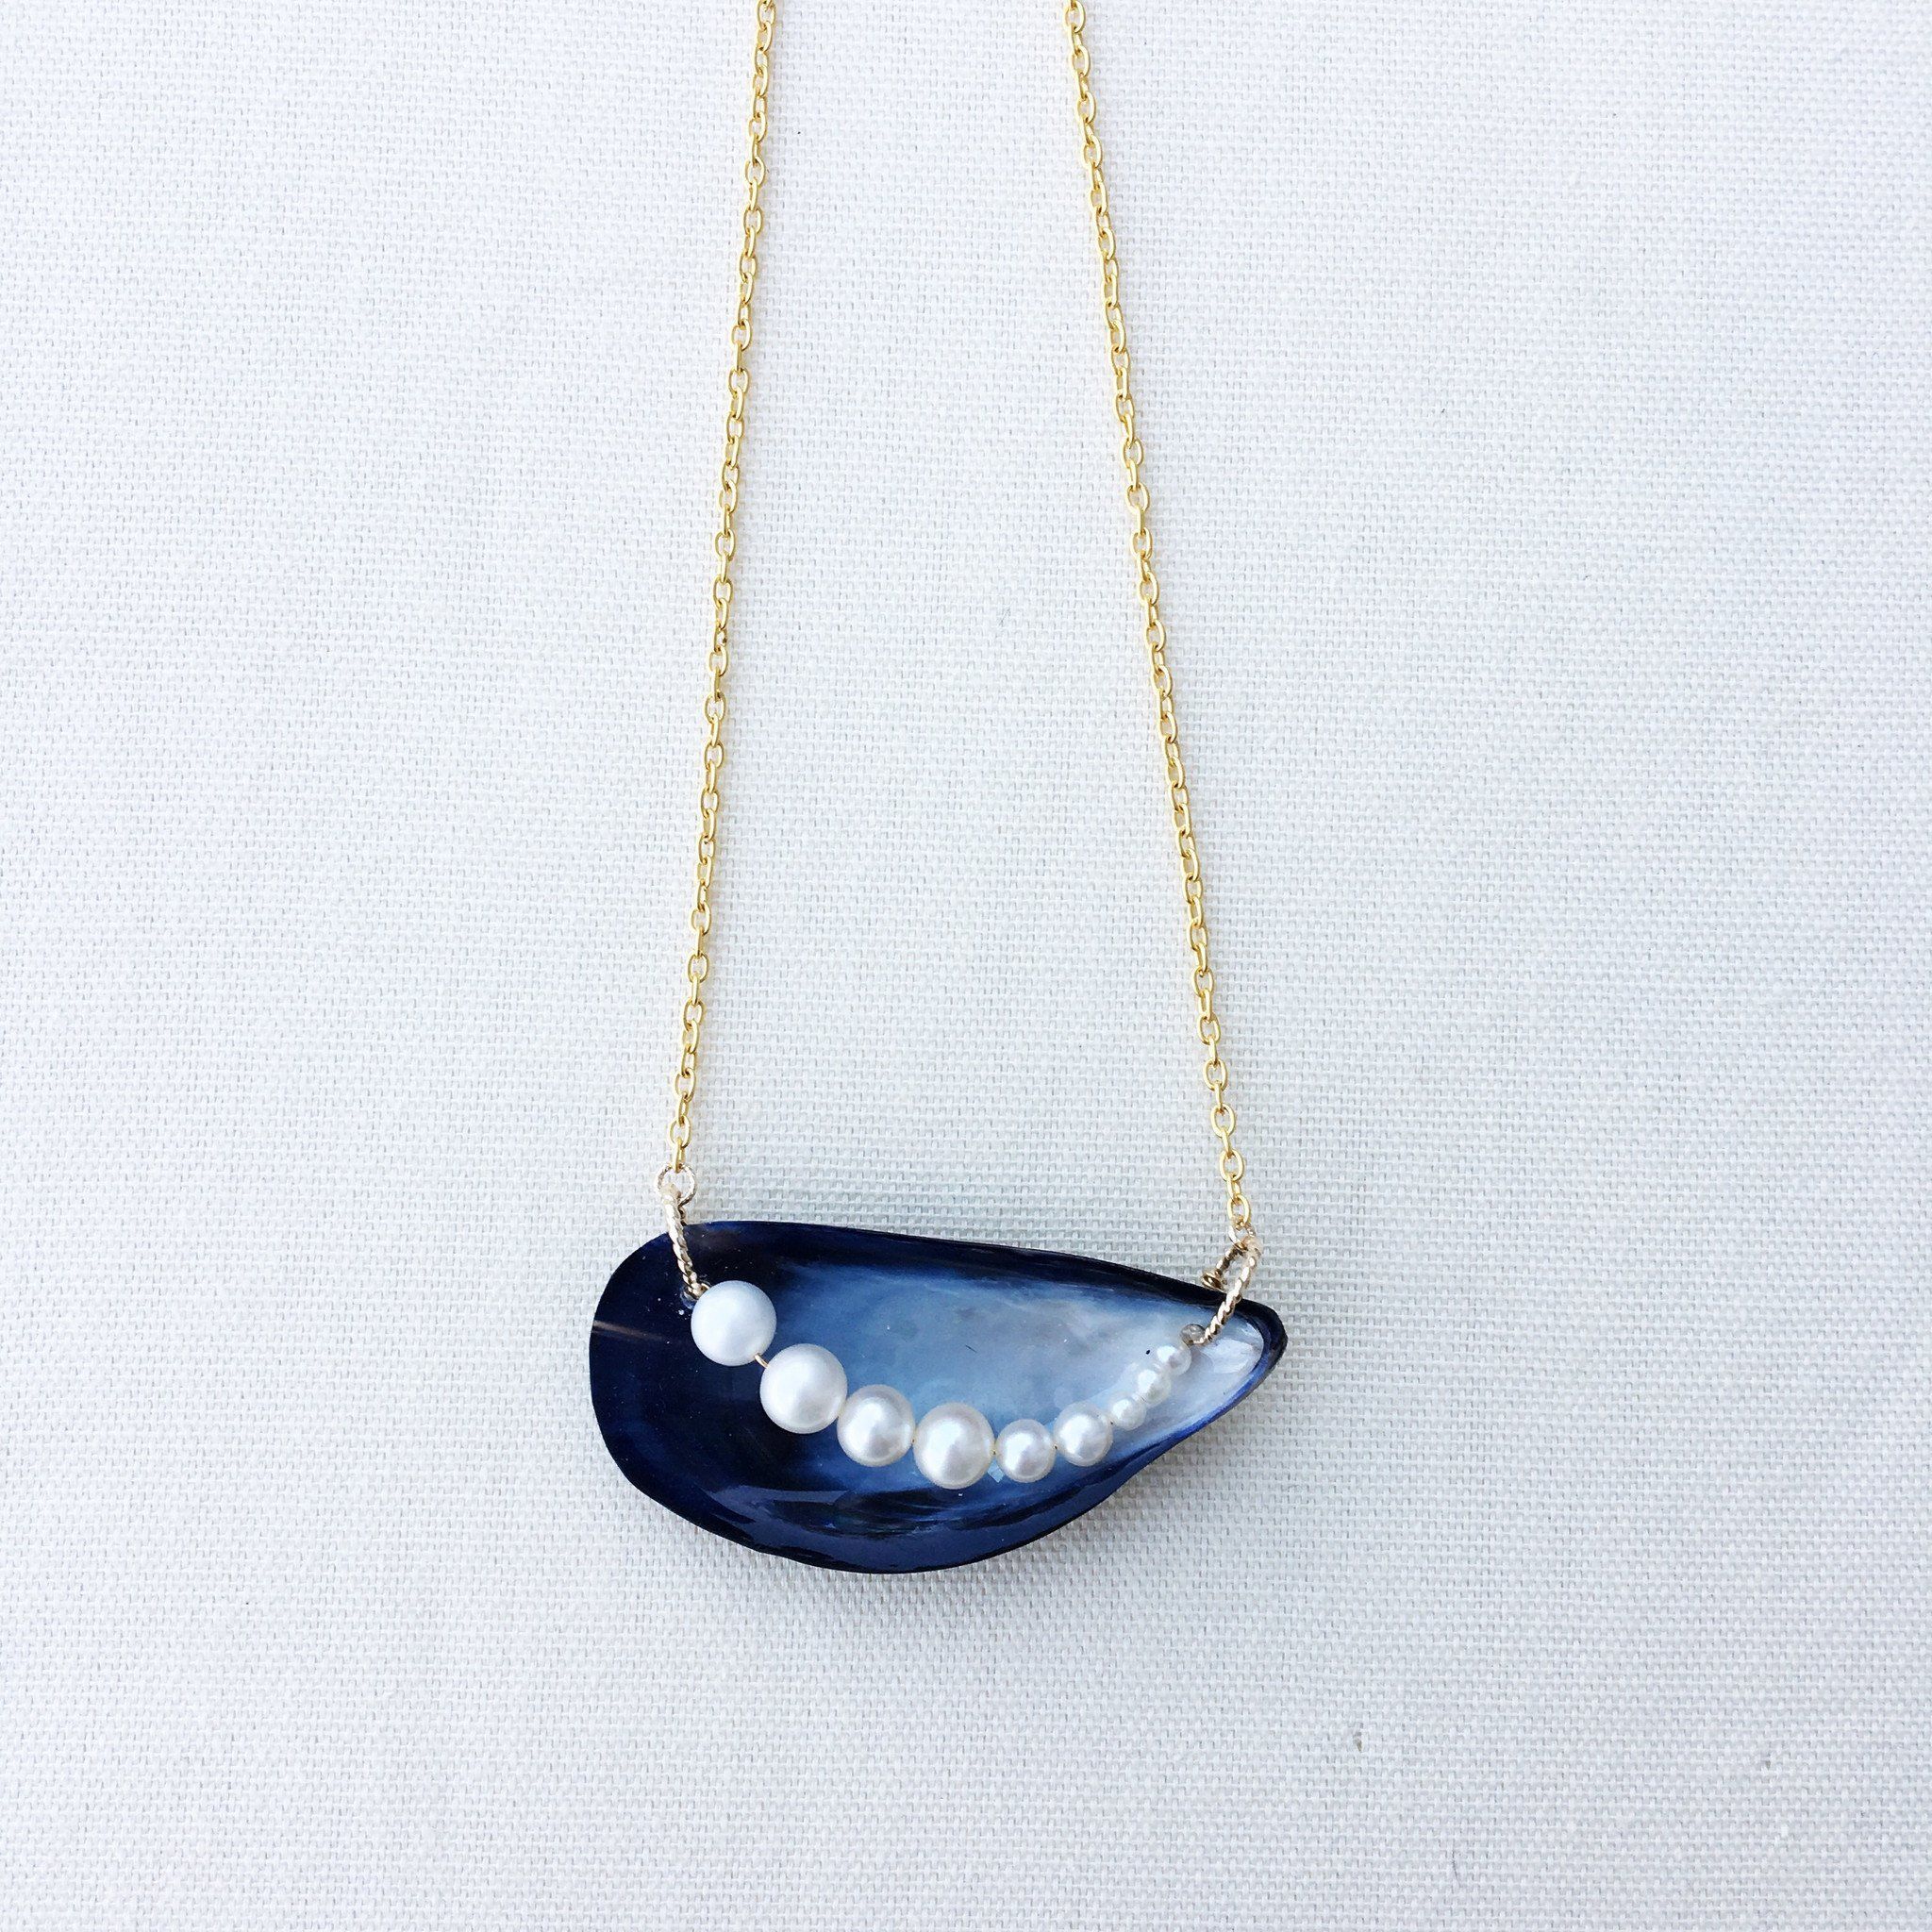 Mussel of Pearls Necklace -   12 mussel shell crafts
 ideas